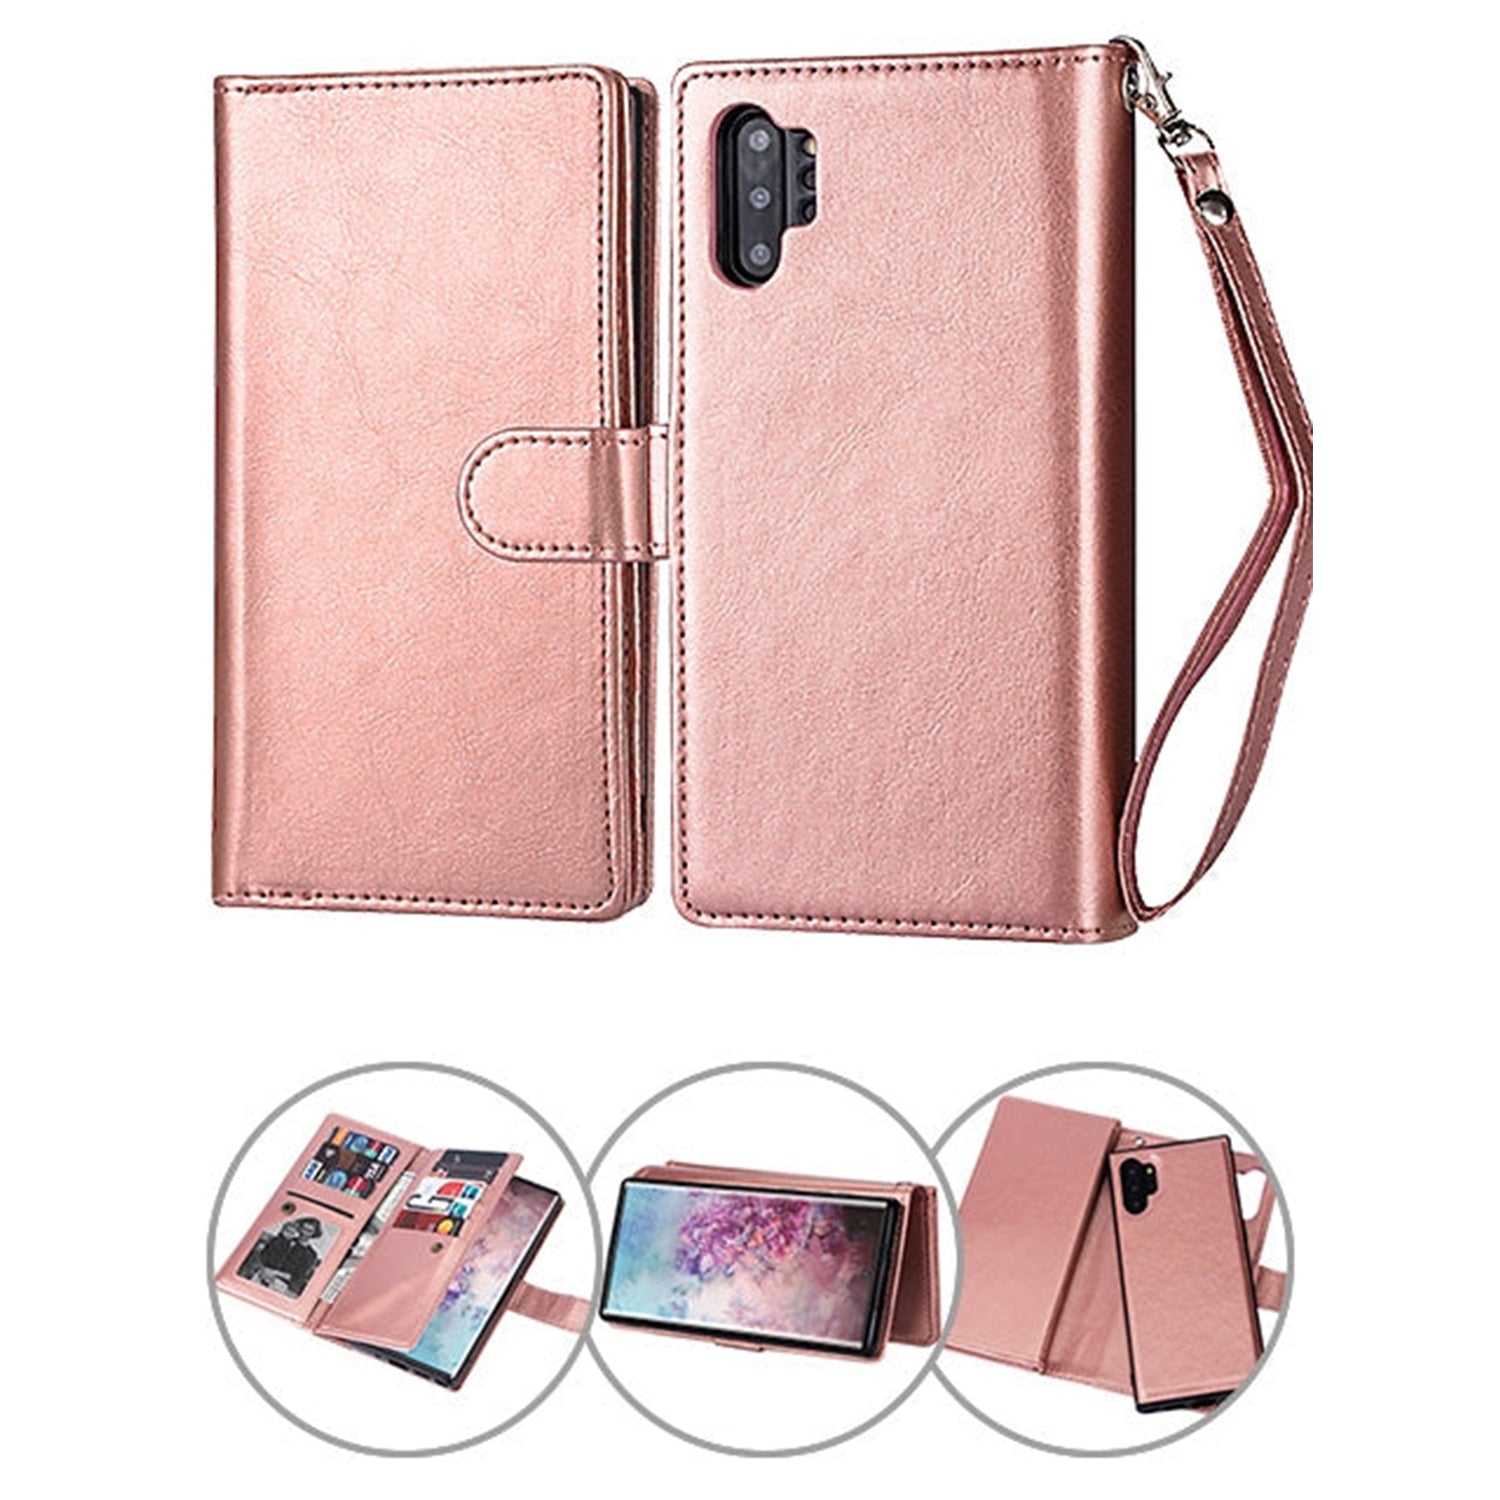 Samsung Galaxy Note 10 Plus 2 in 1 Leather Wallet Case With 9 Credit Card Slots and Removable Back Cover